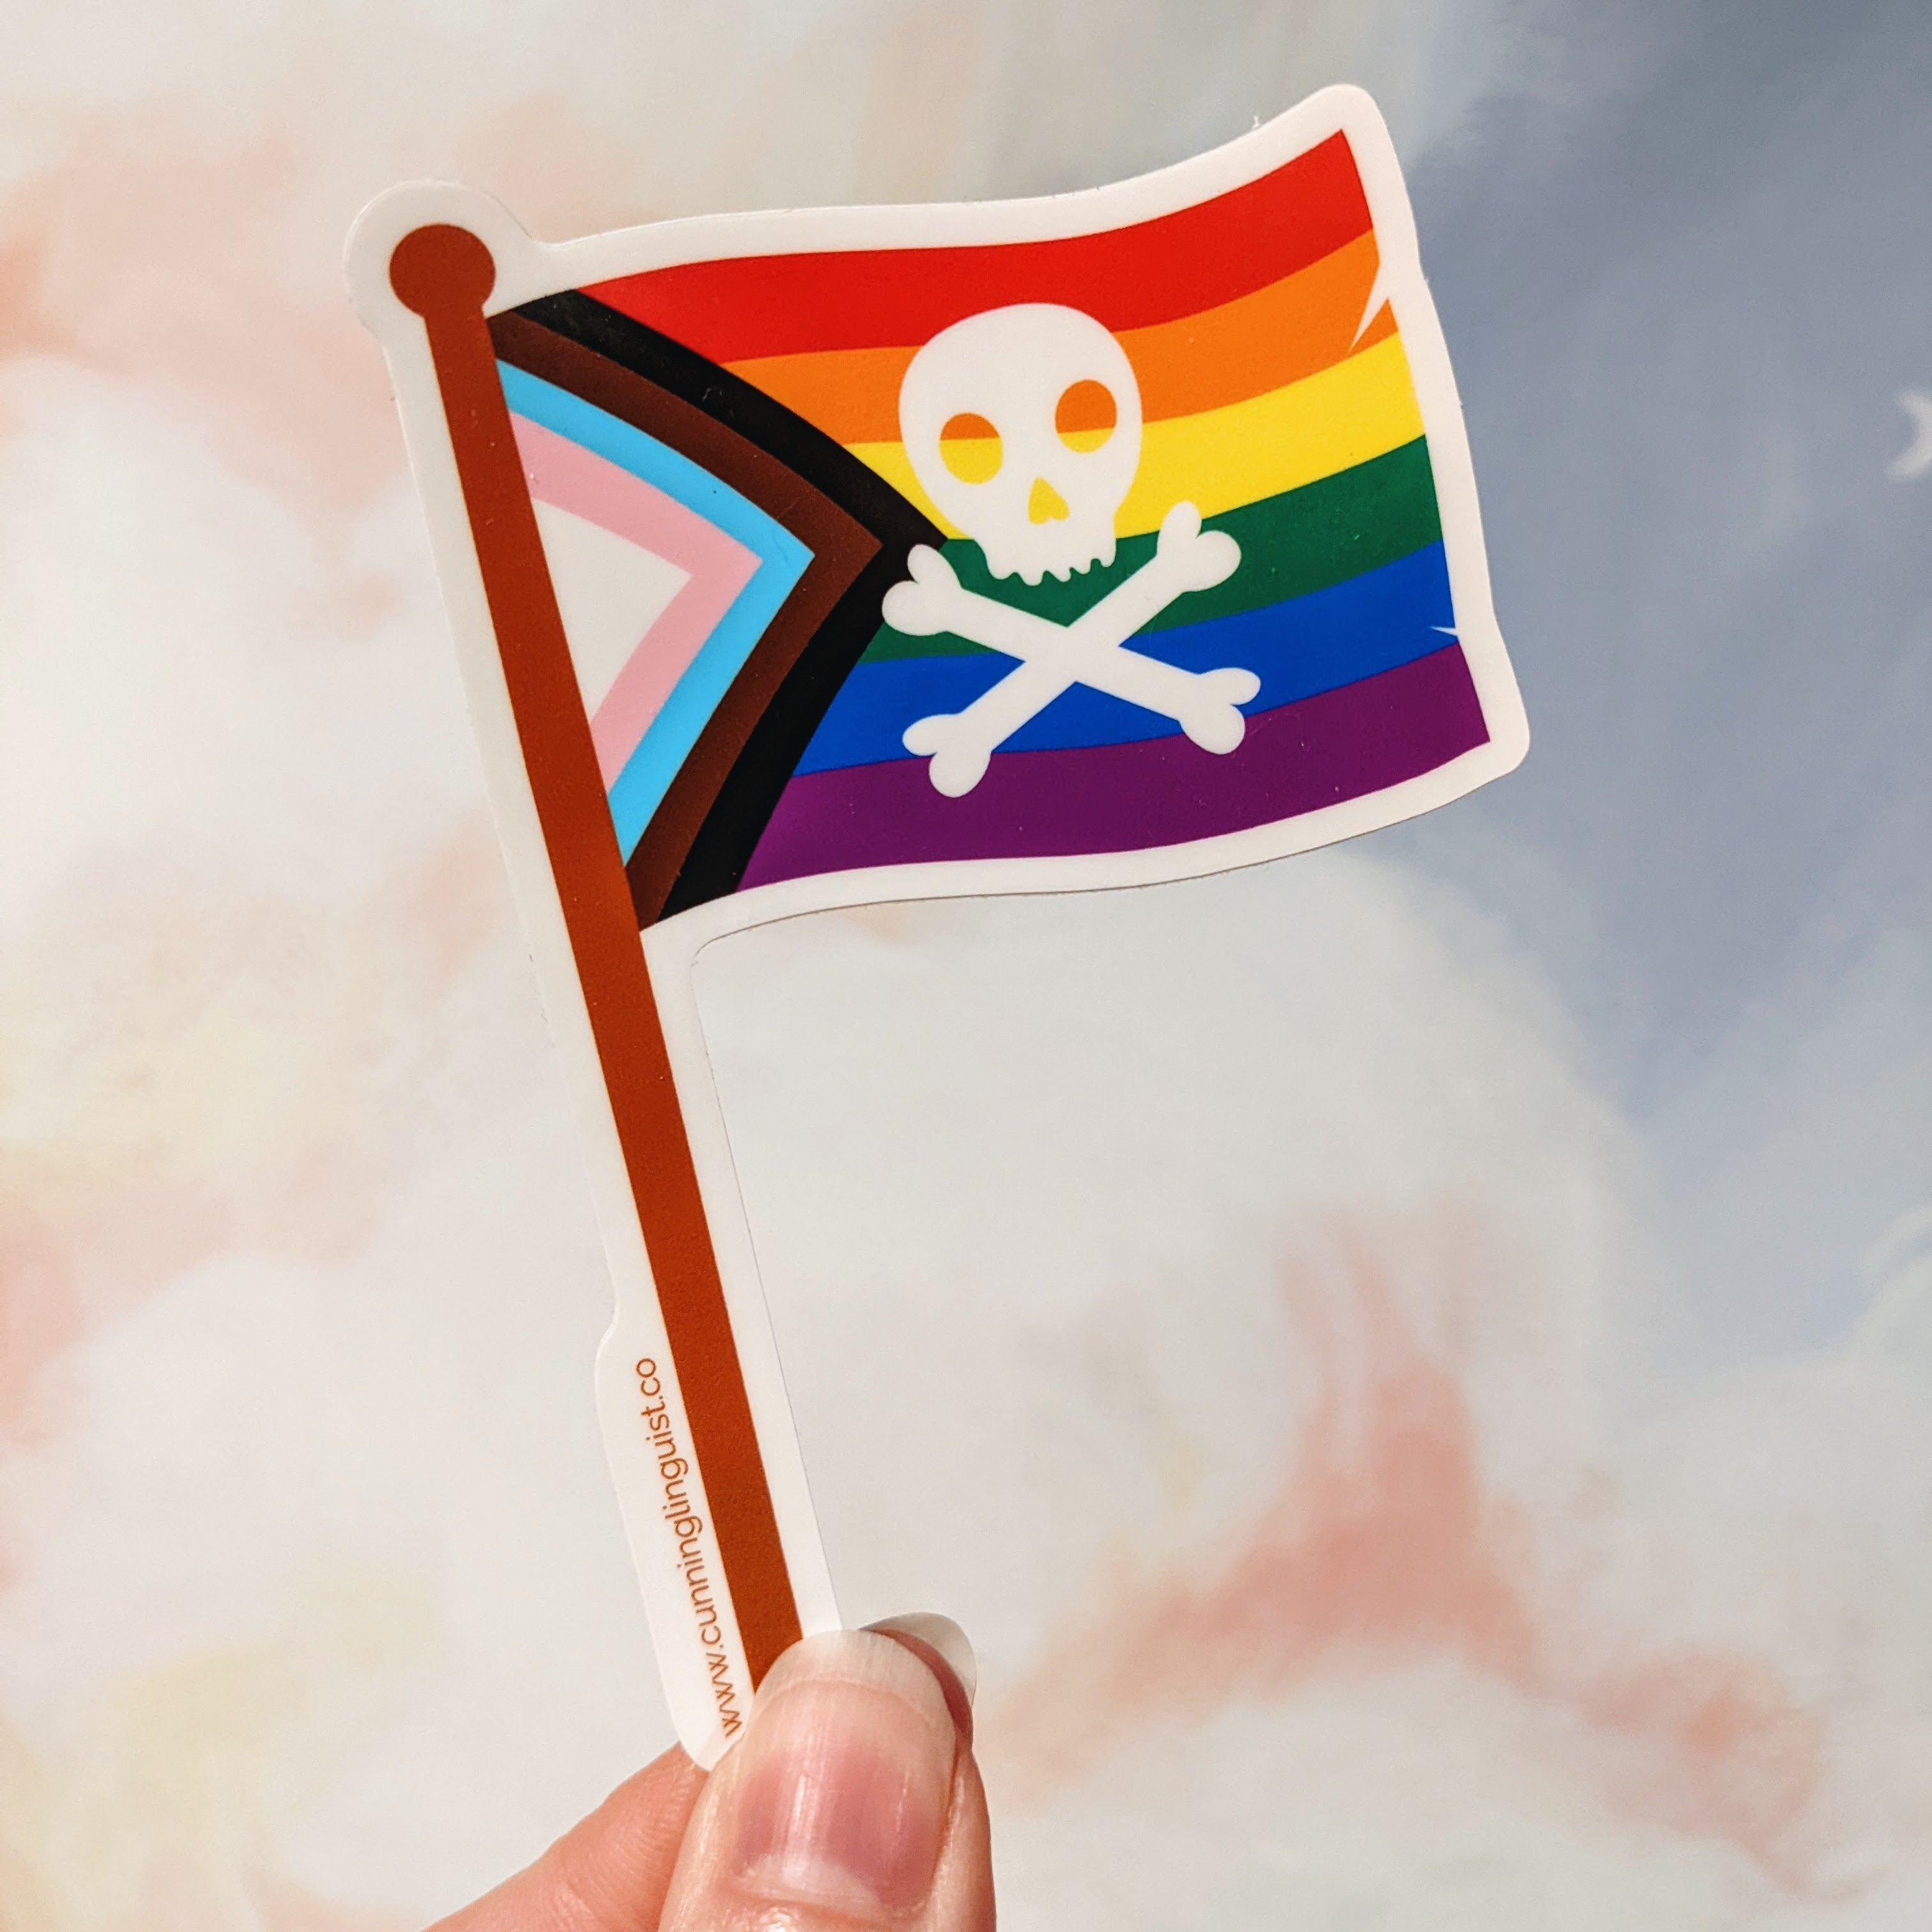 Our Flag Means Pride sticker